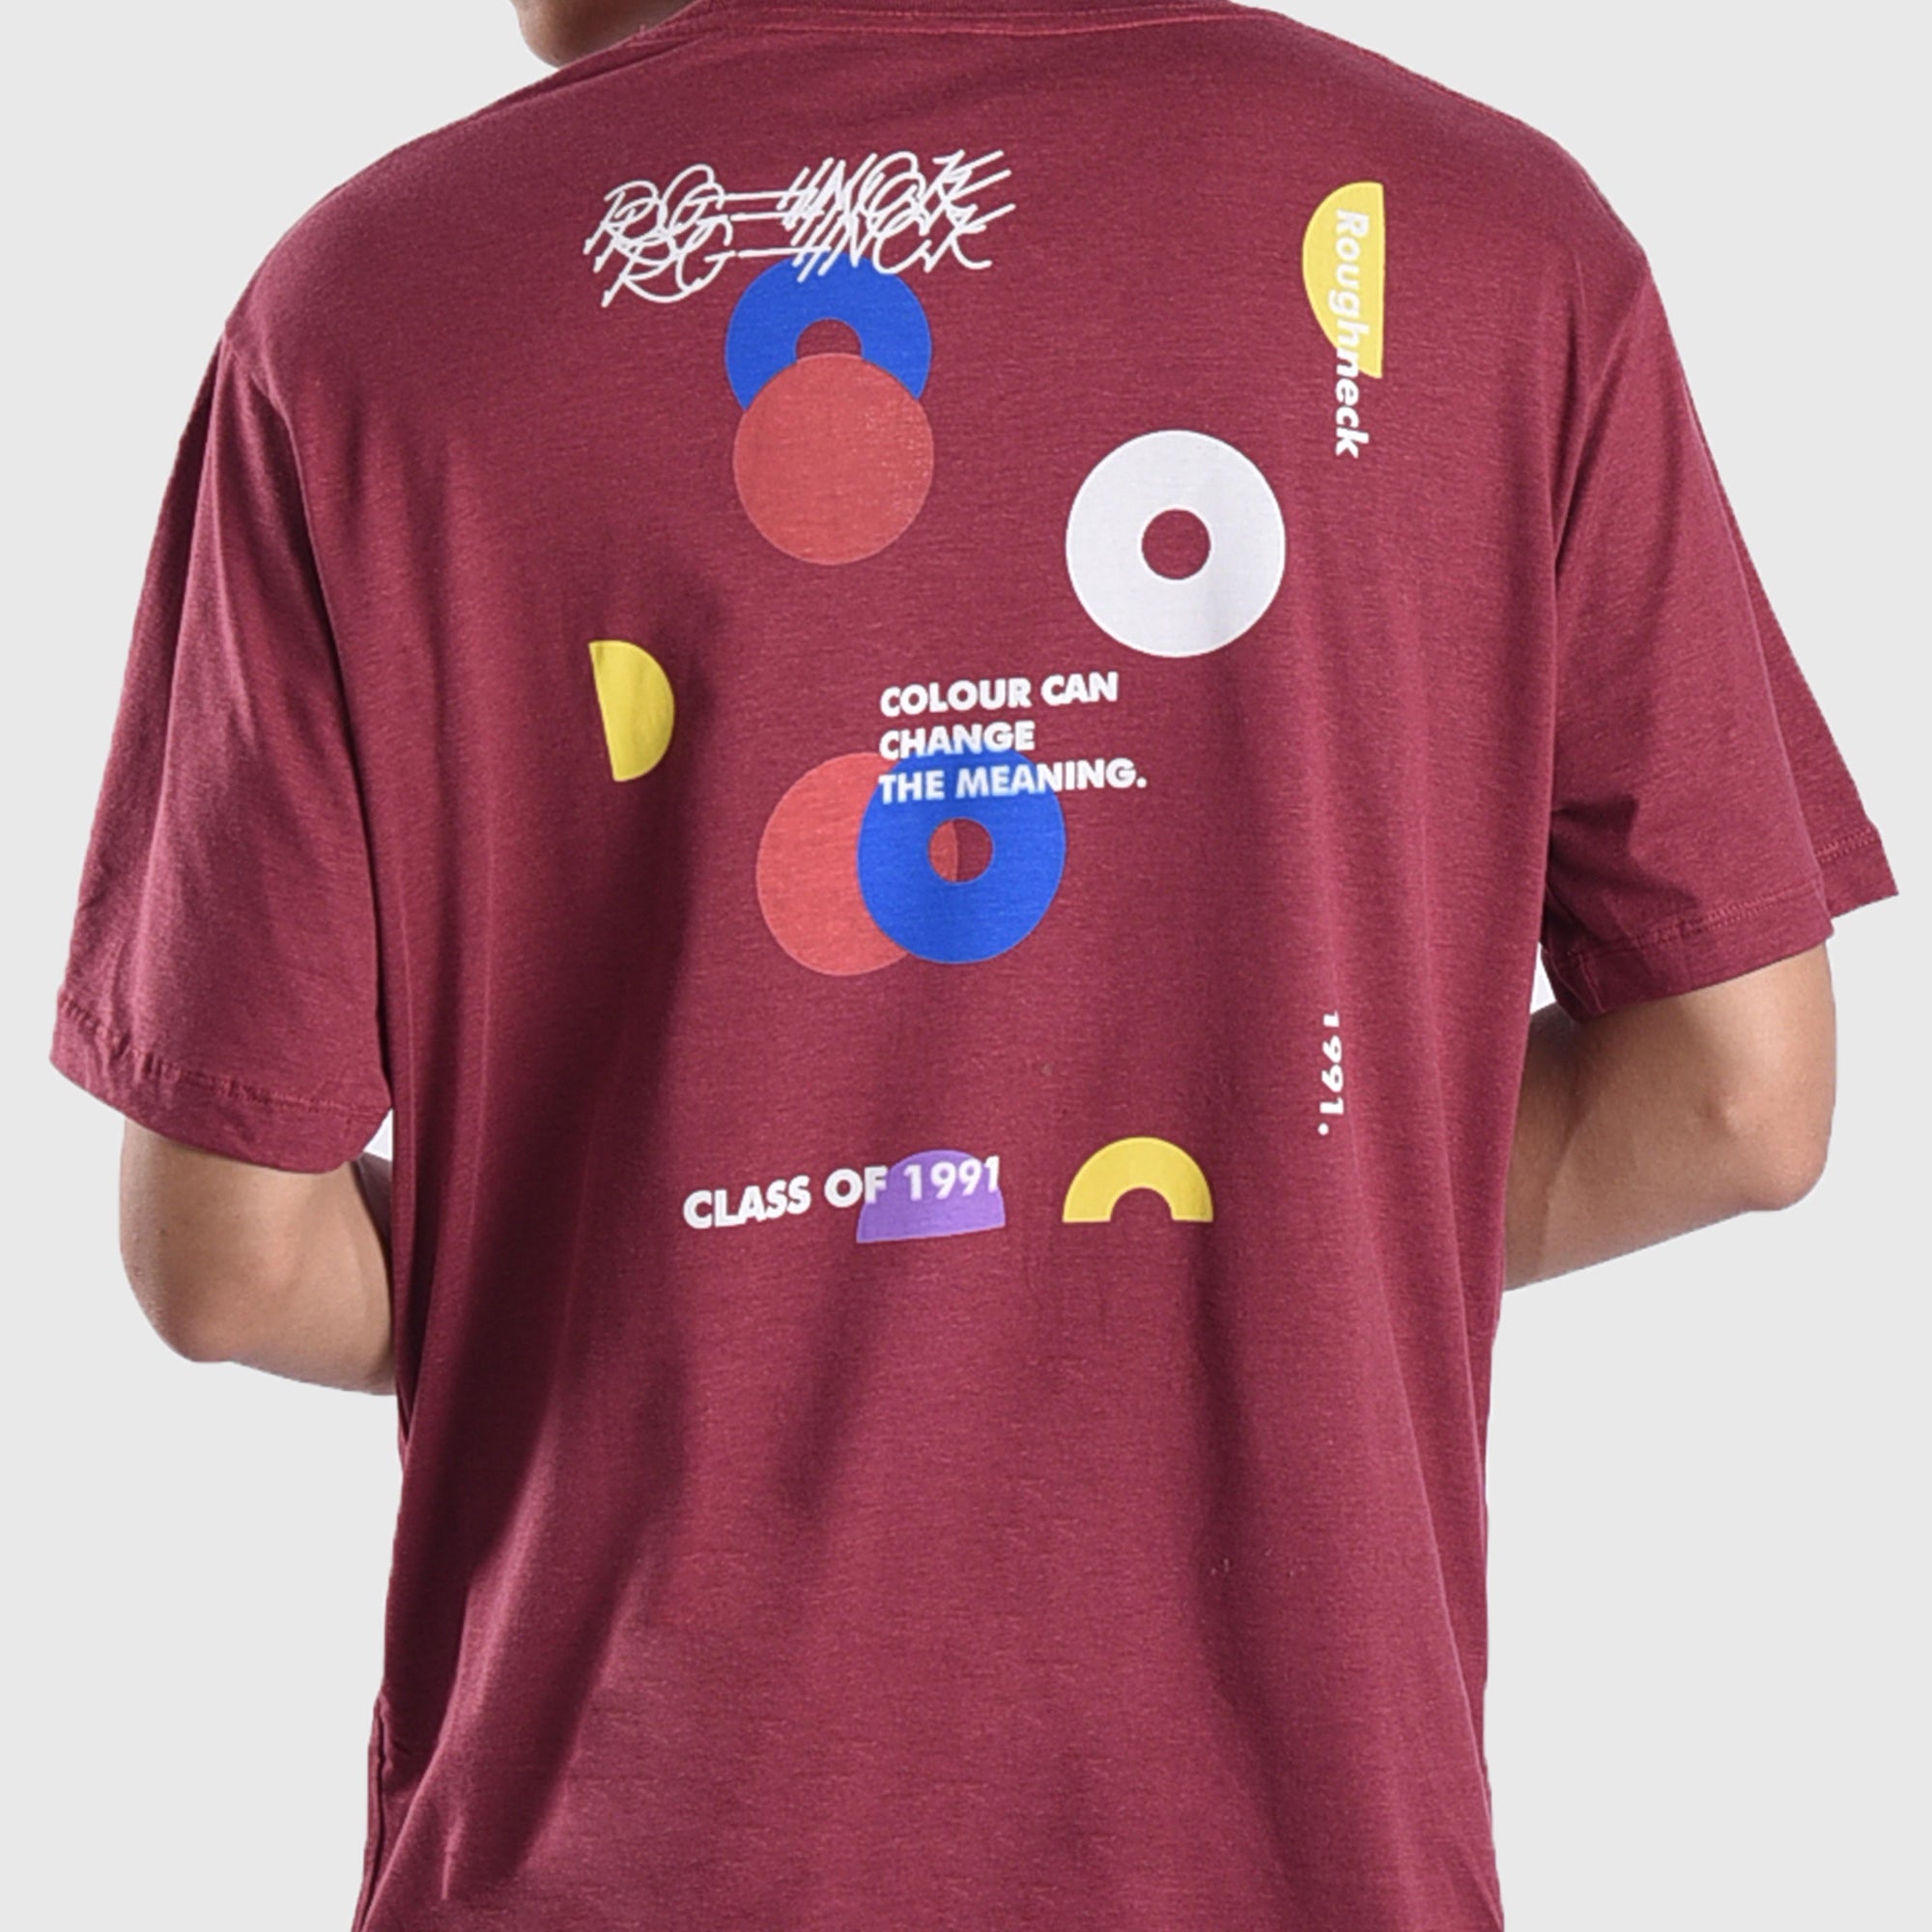 T553 Maroon Change The Meaning Tshirt